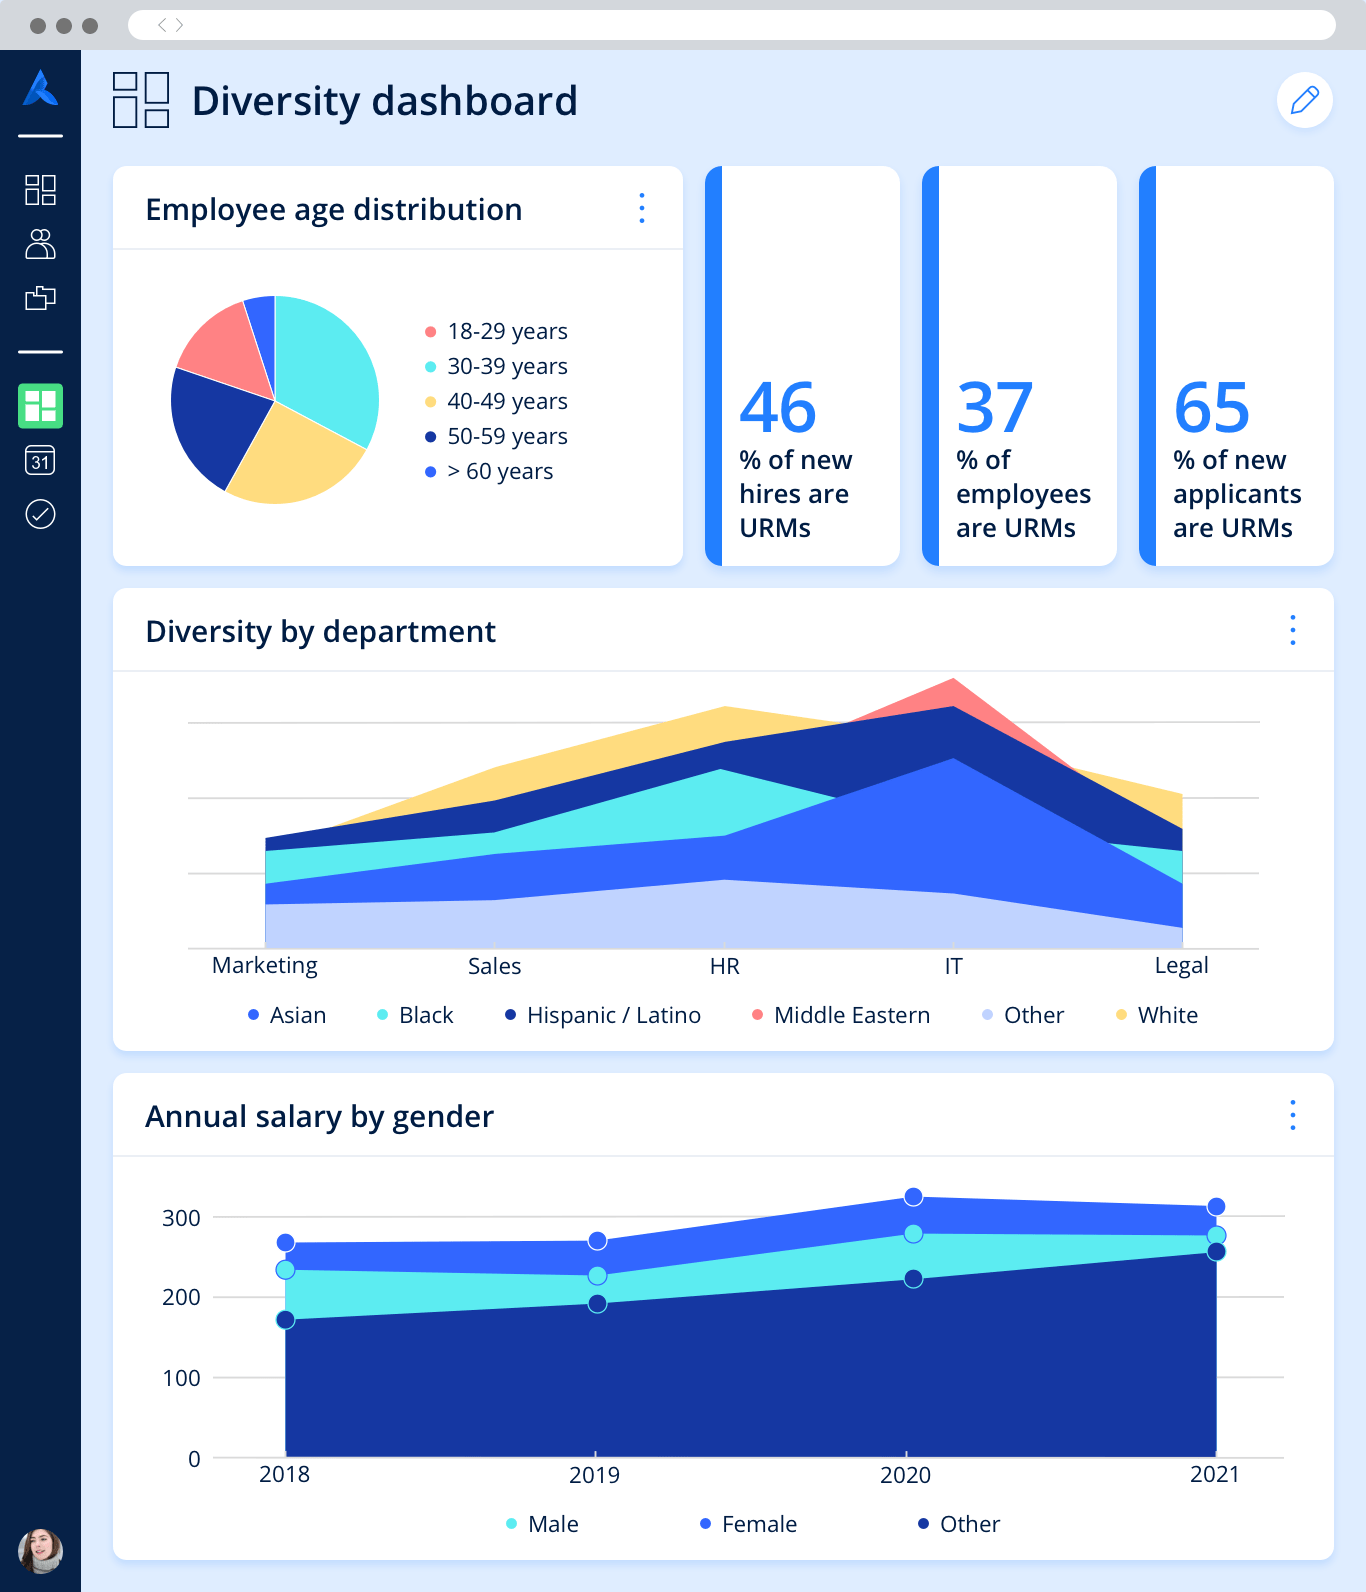 A diversity dashboard with various metrics such as employee age distribution, diversity by department and others.